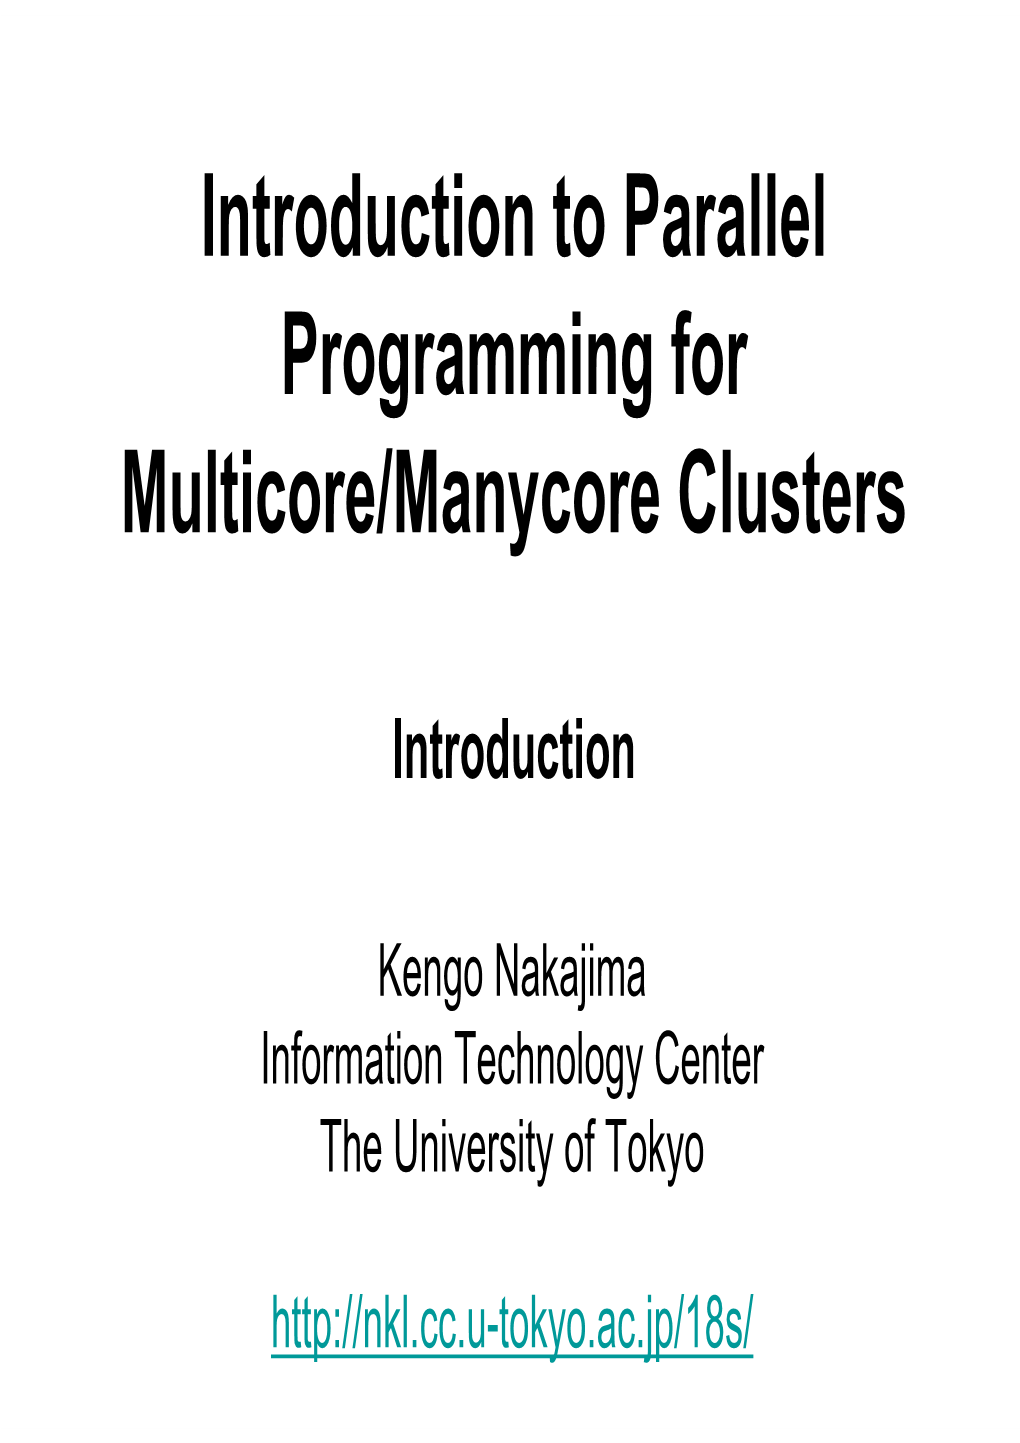 Introduction to Parallel Programming for Multicore/Manycore Clusters